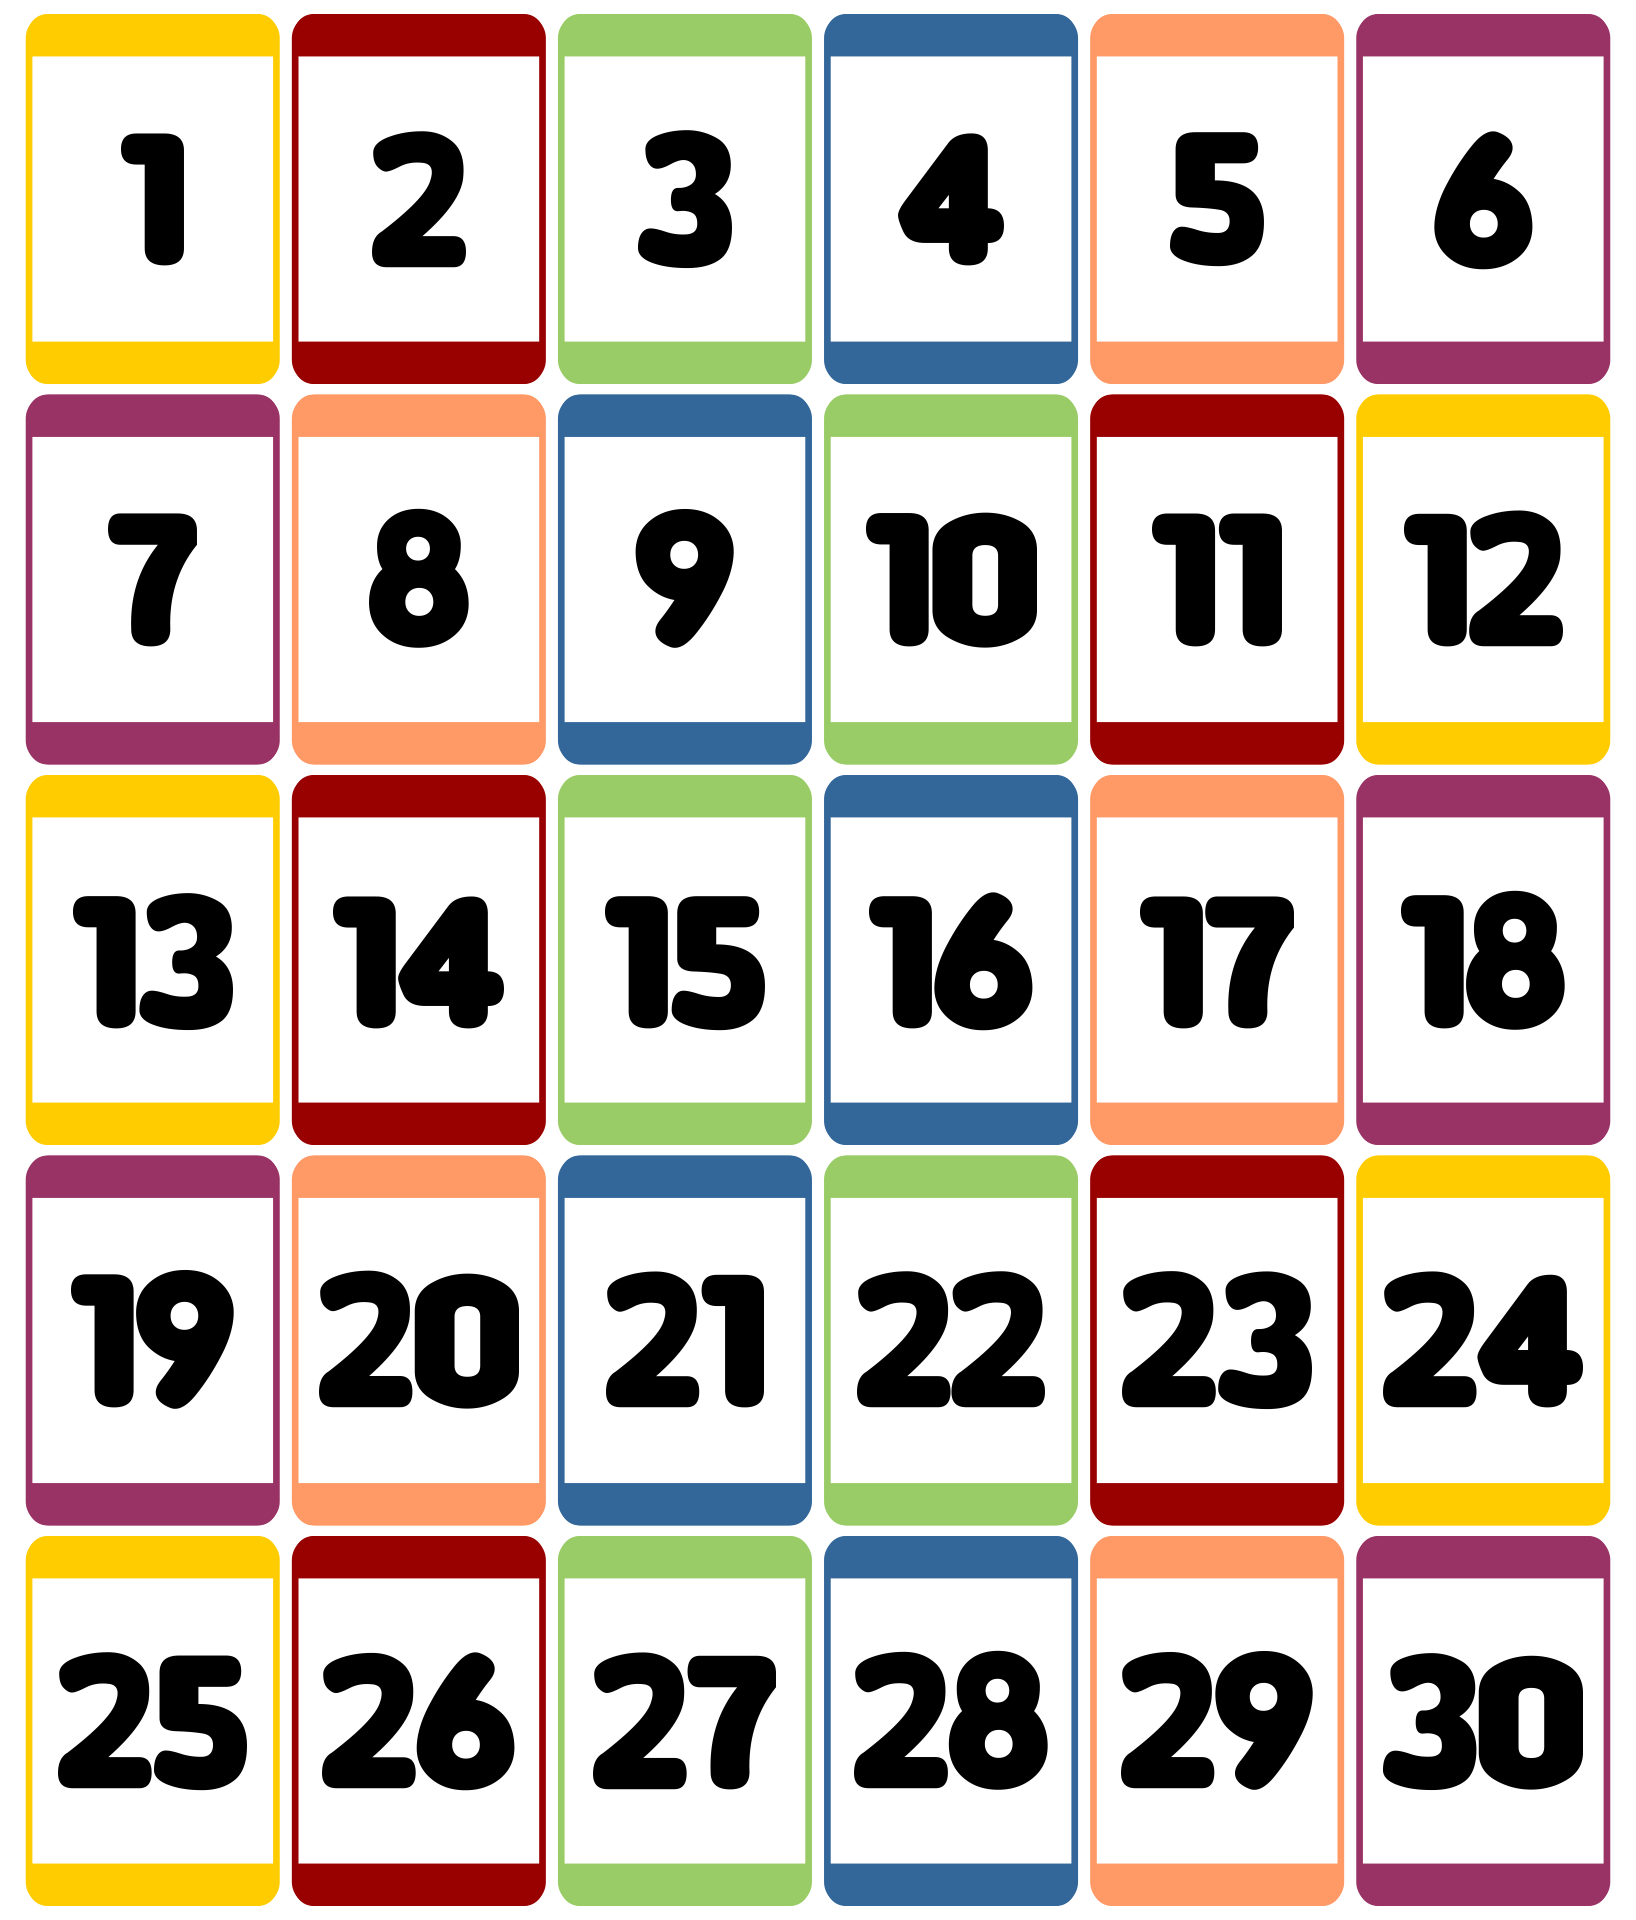 number-flashcards-1-50-printable-free-number-cards-3-levels-this